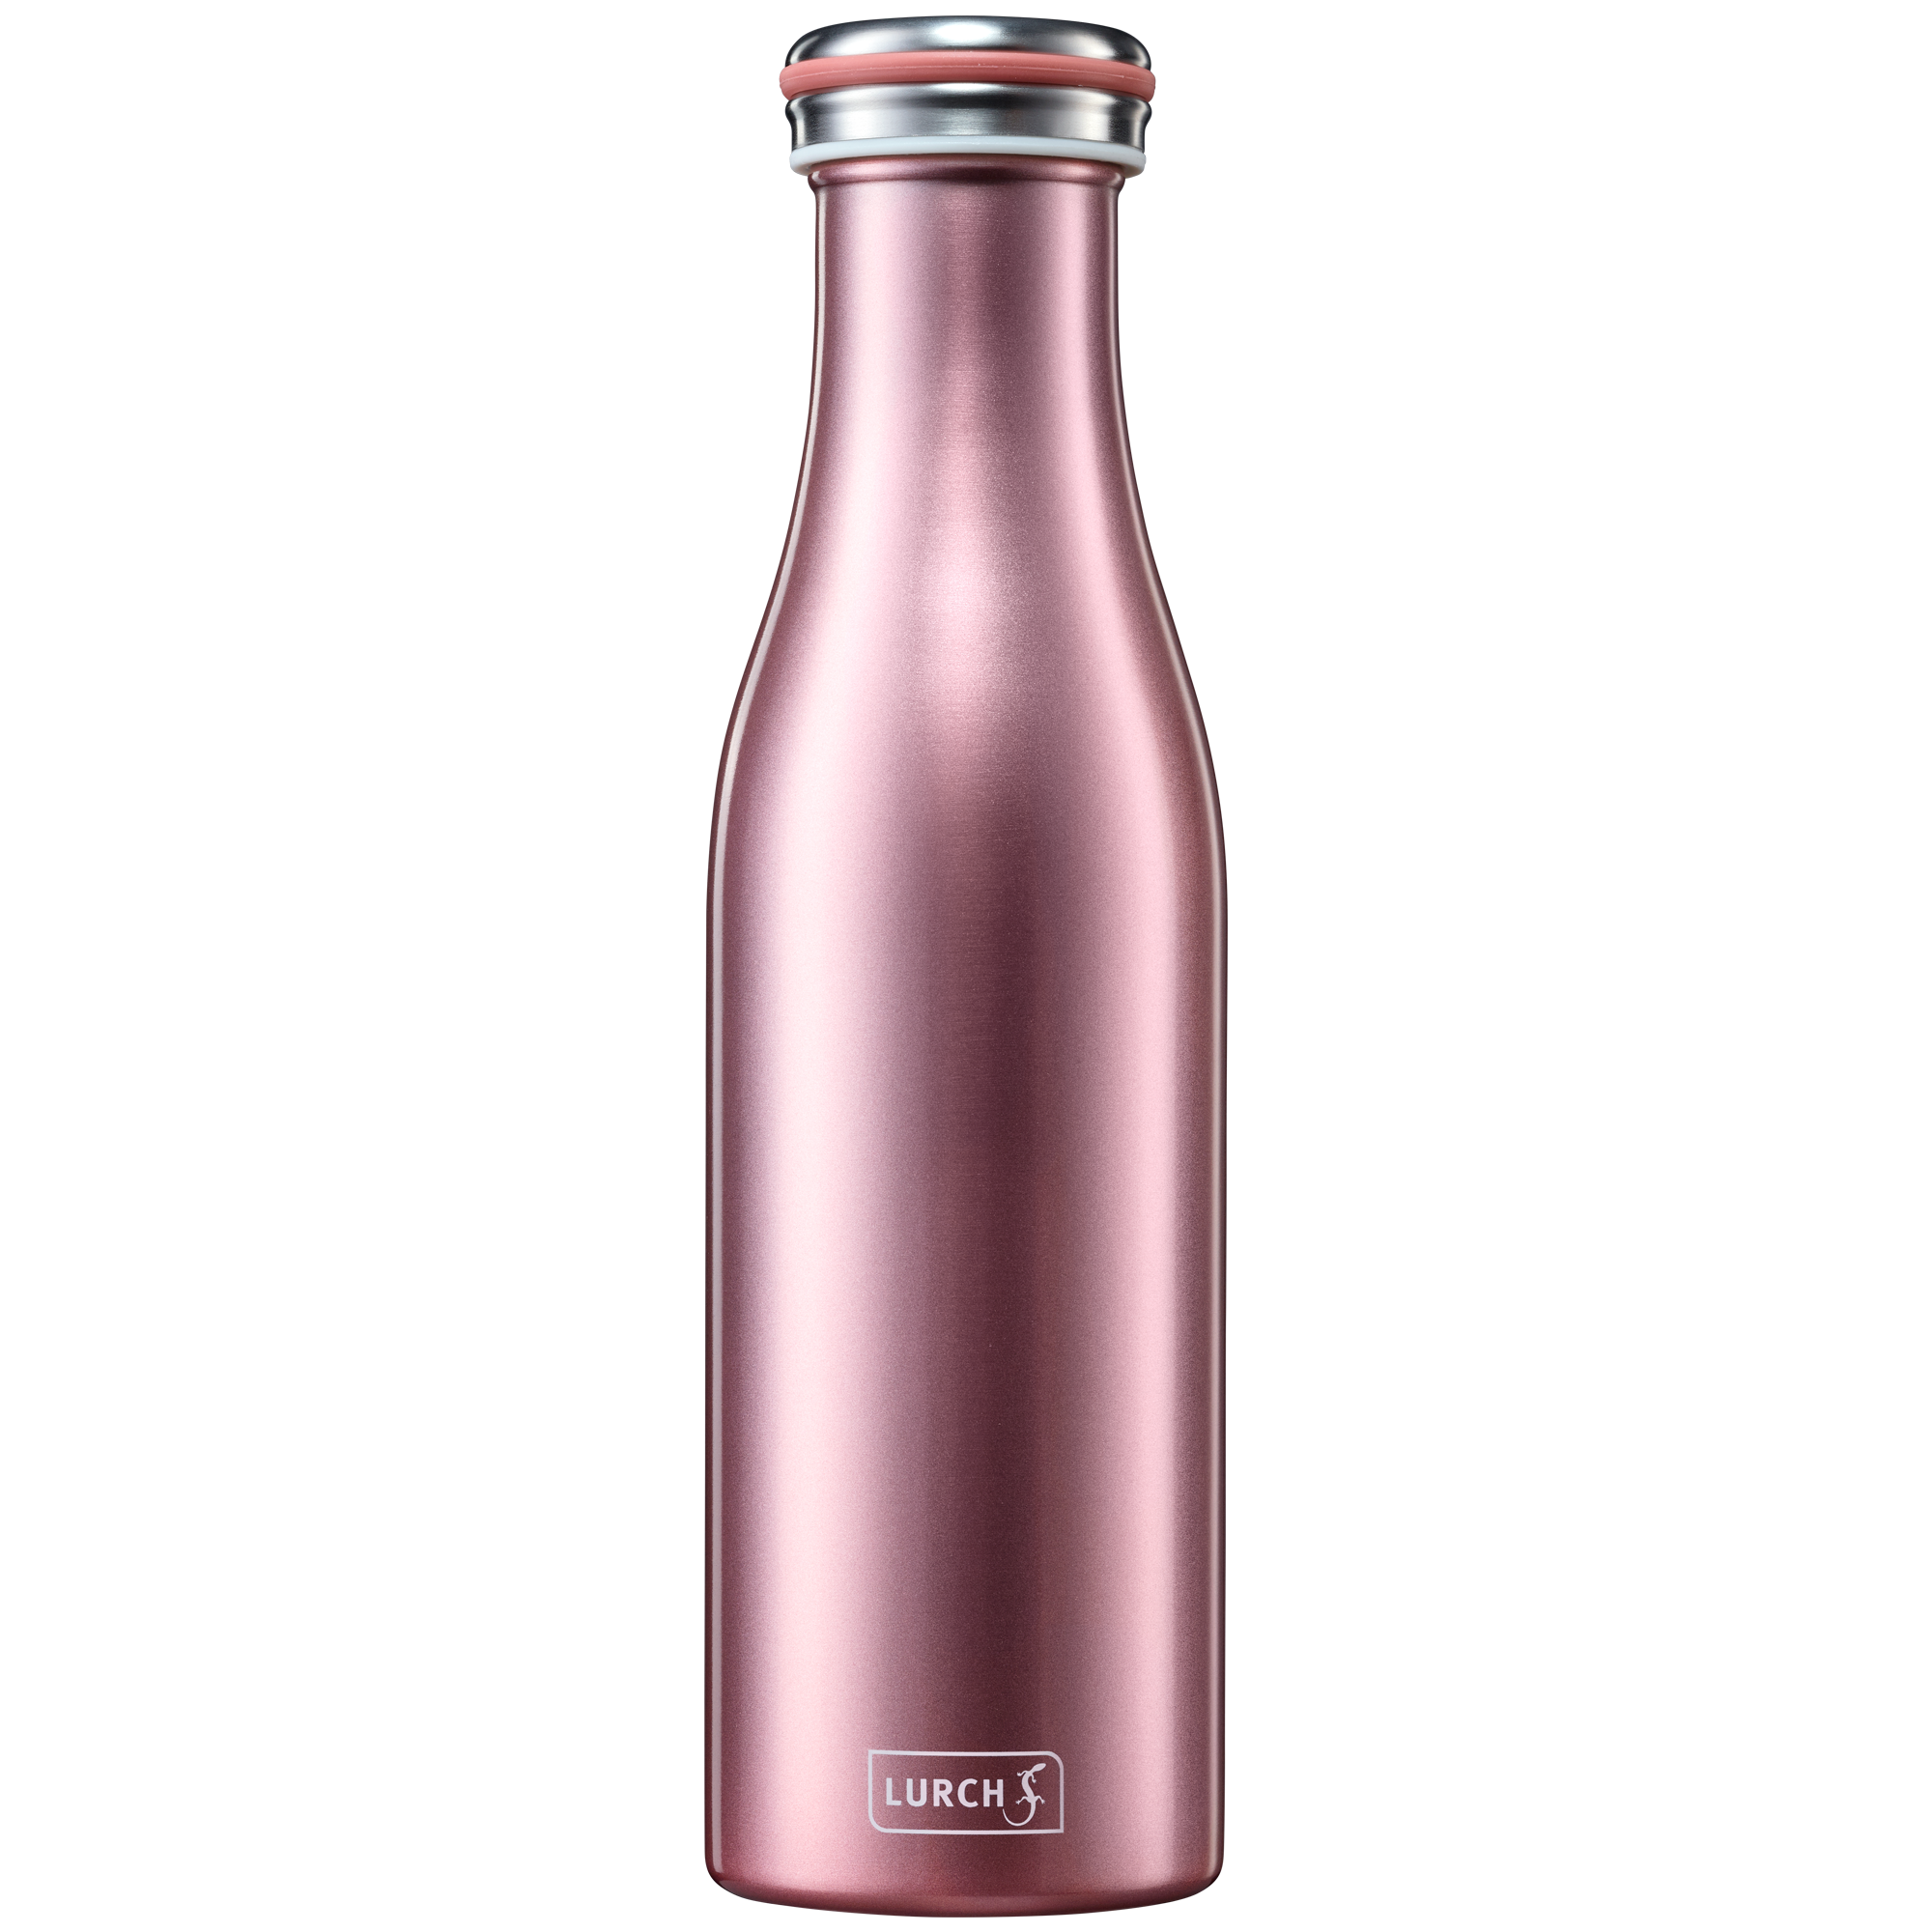 Edelstahl Isolierkanne / Thermosflasche / Thermoskanne / 0,5l / Farbe: rot